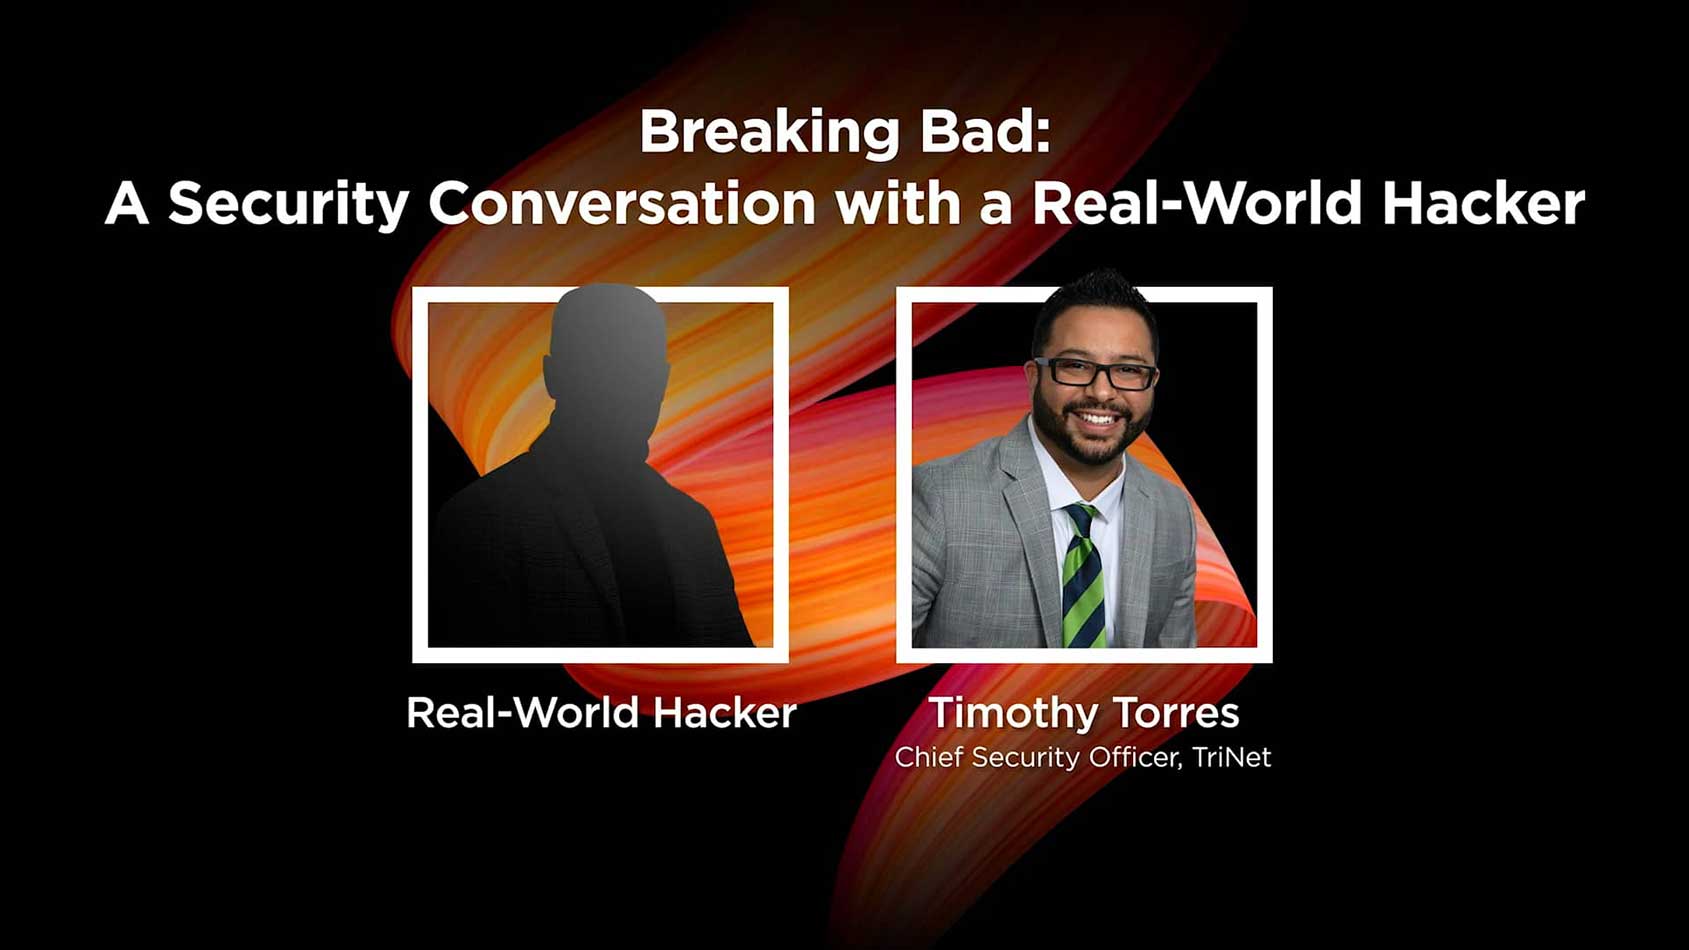 Breaking Bad: A Security Conversation with a Real-World Hacker